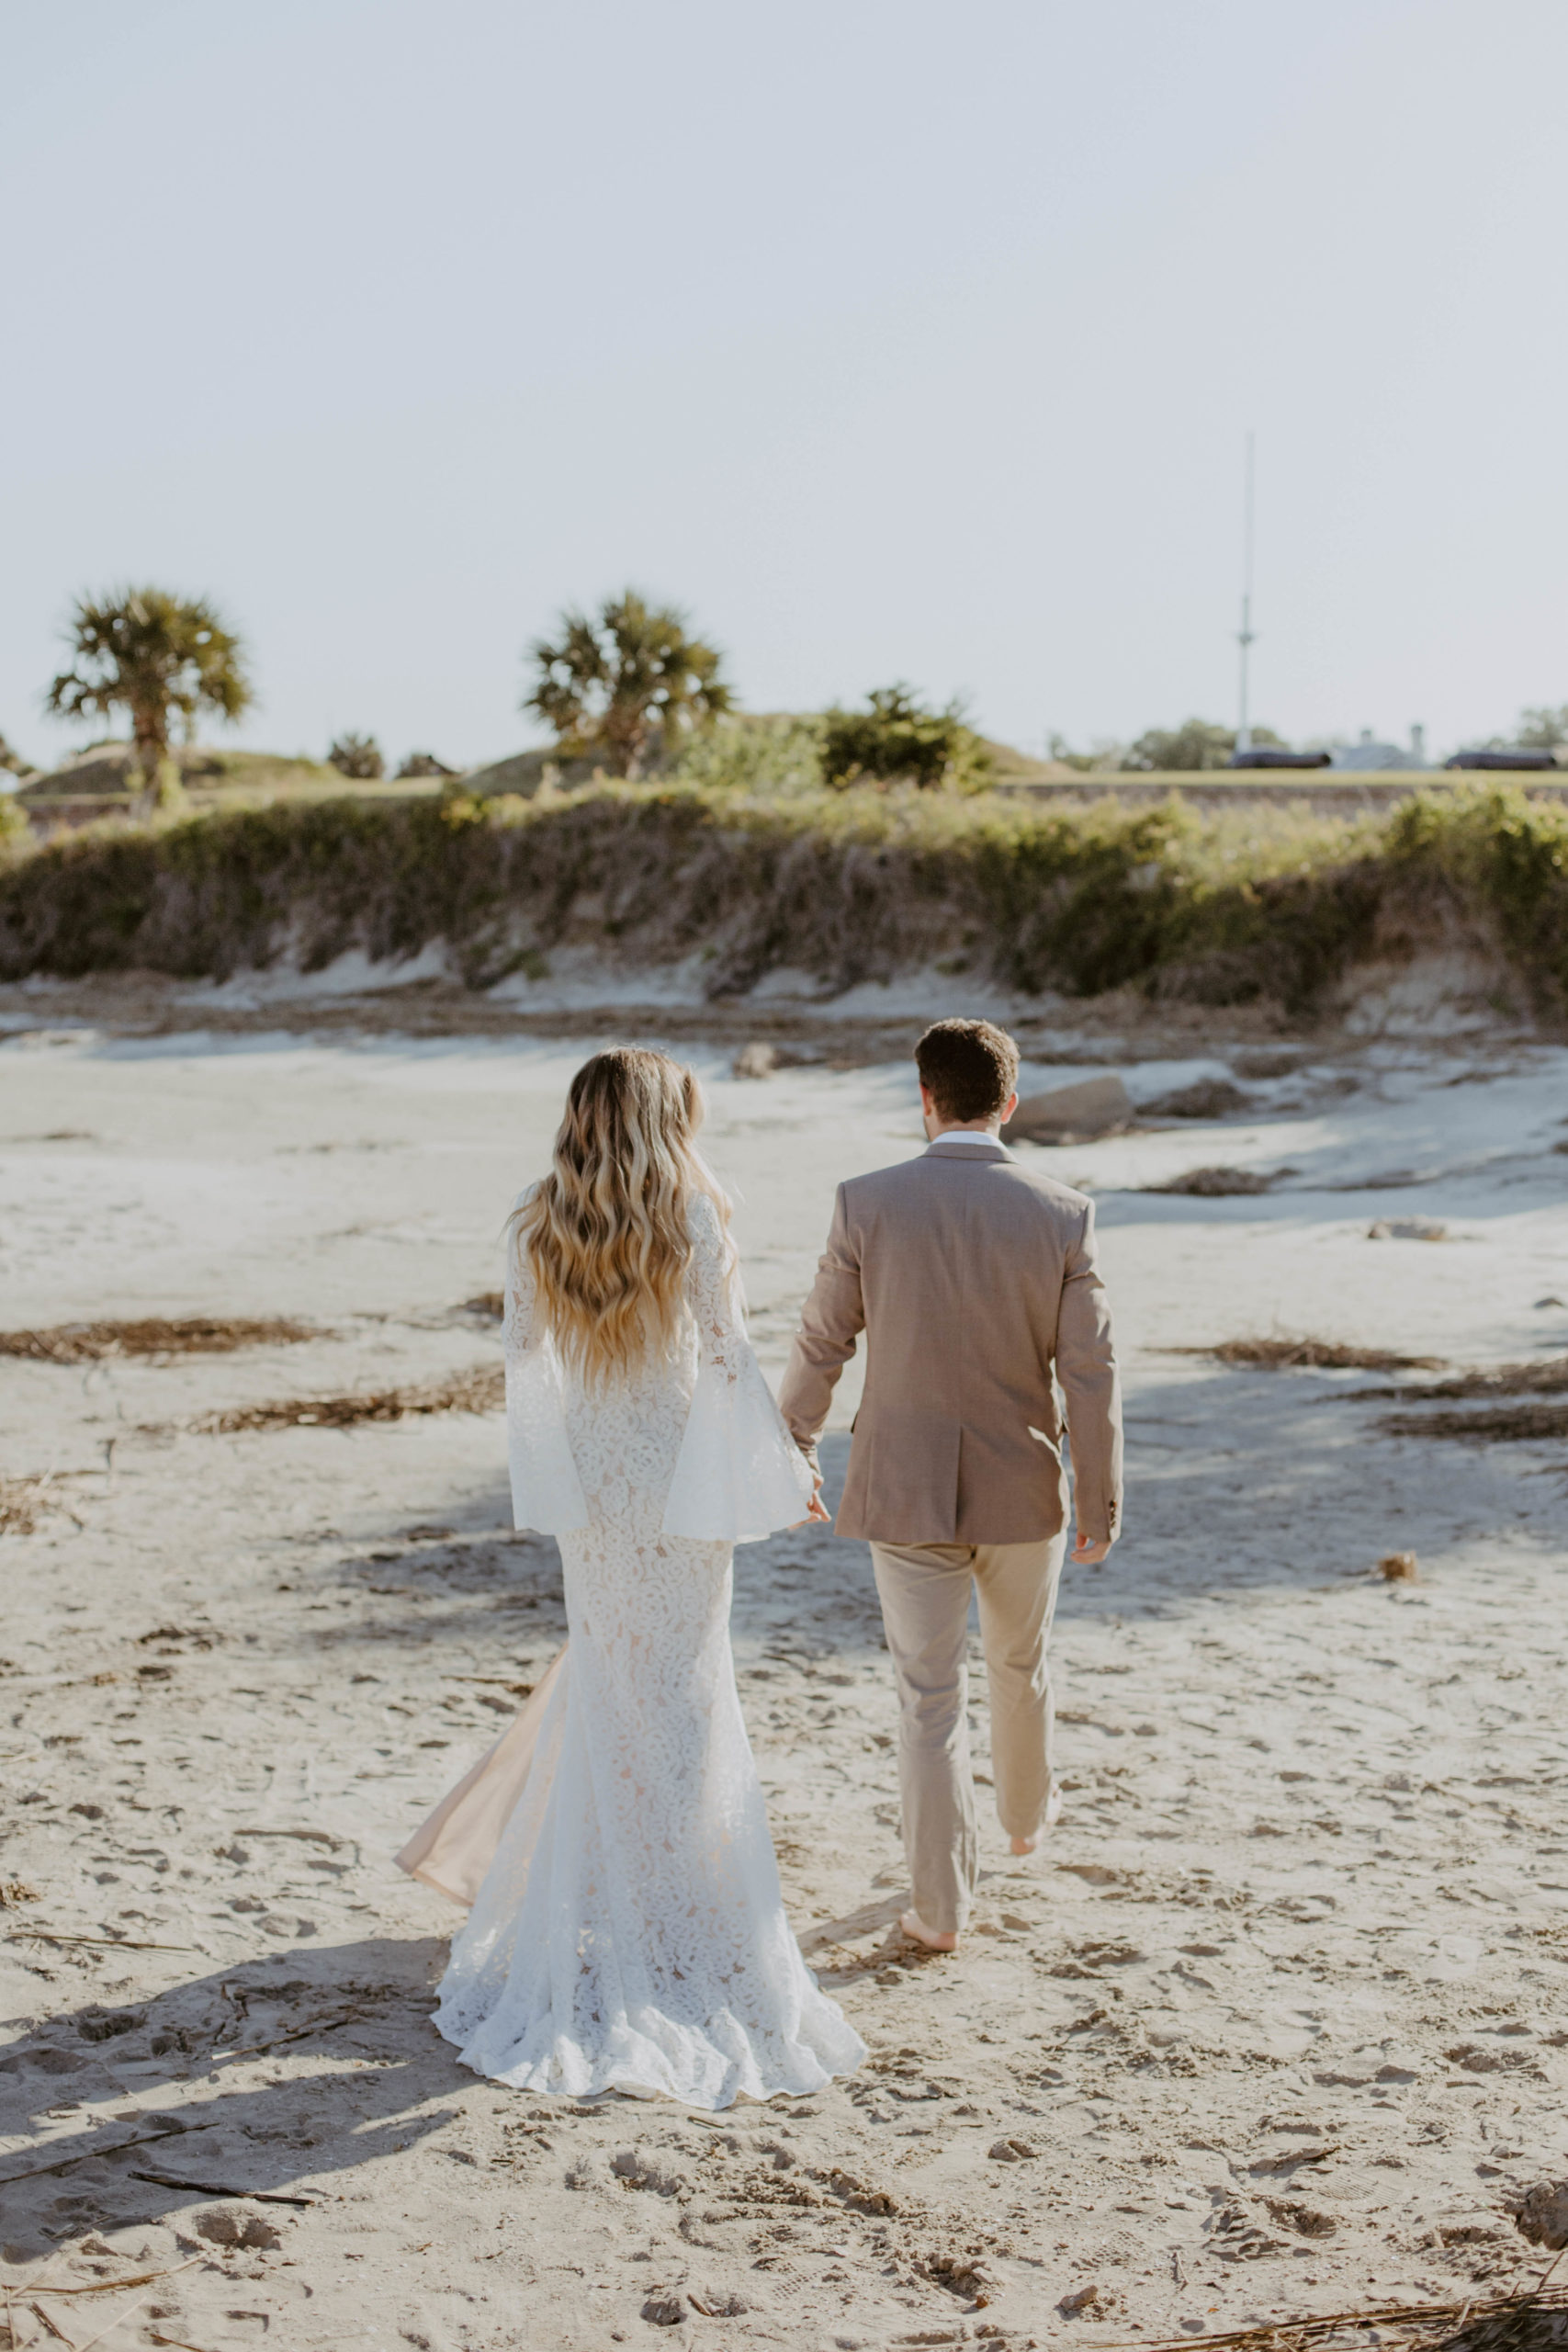 Bride wearing beautiful bohemian dress and groom wearing neutral tan suit walking along the beach barefoot away from the camera while holding hands.